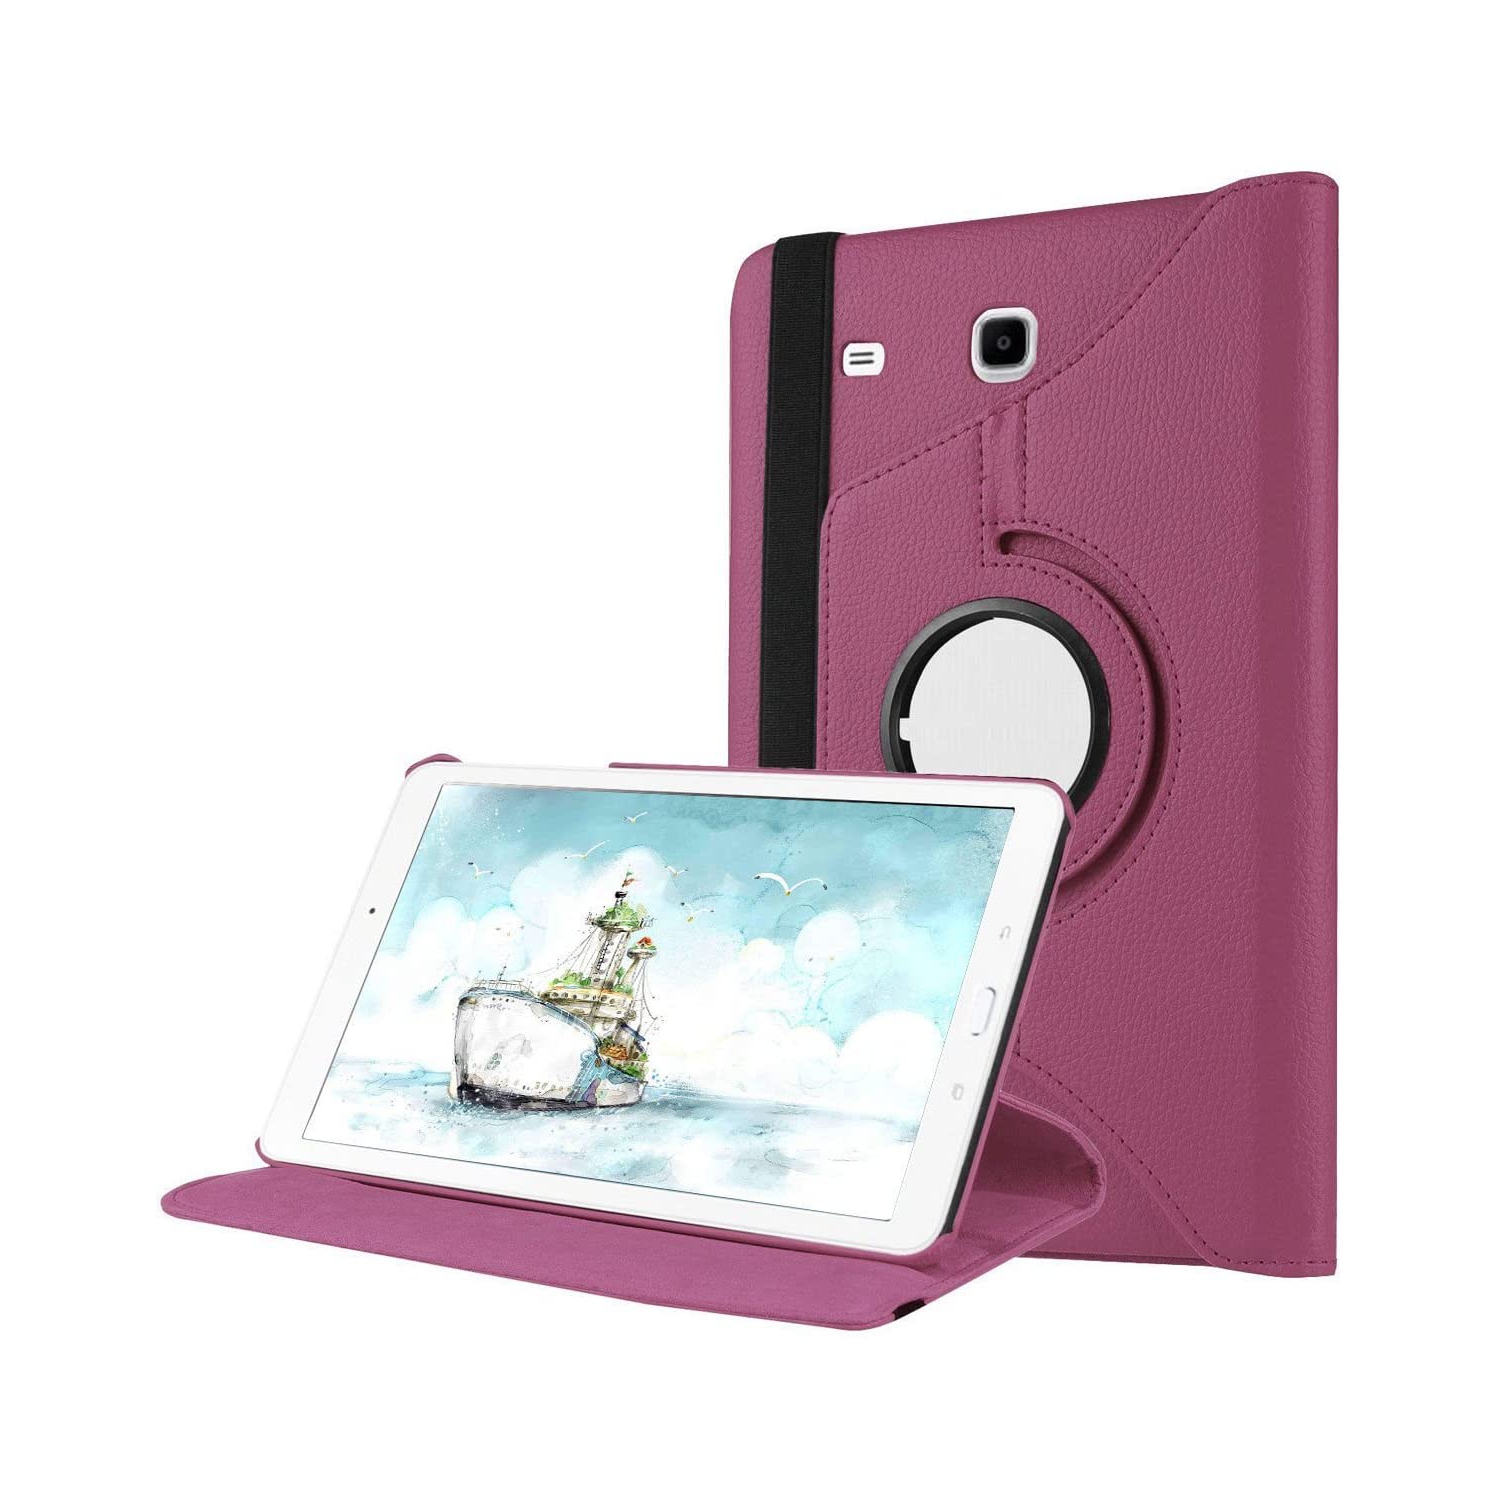 【CSmart】 360 Rotating Leather Tablet Case Smart Stand Cover for Samsung Tab E 9.6" T560 T561 T565, Purple